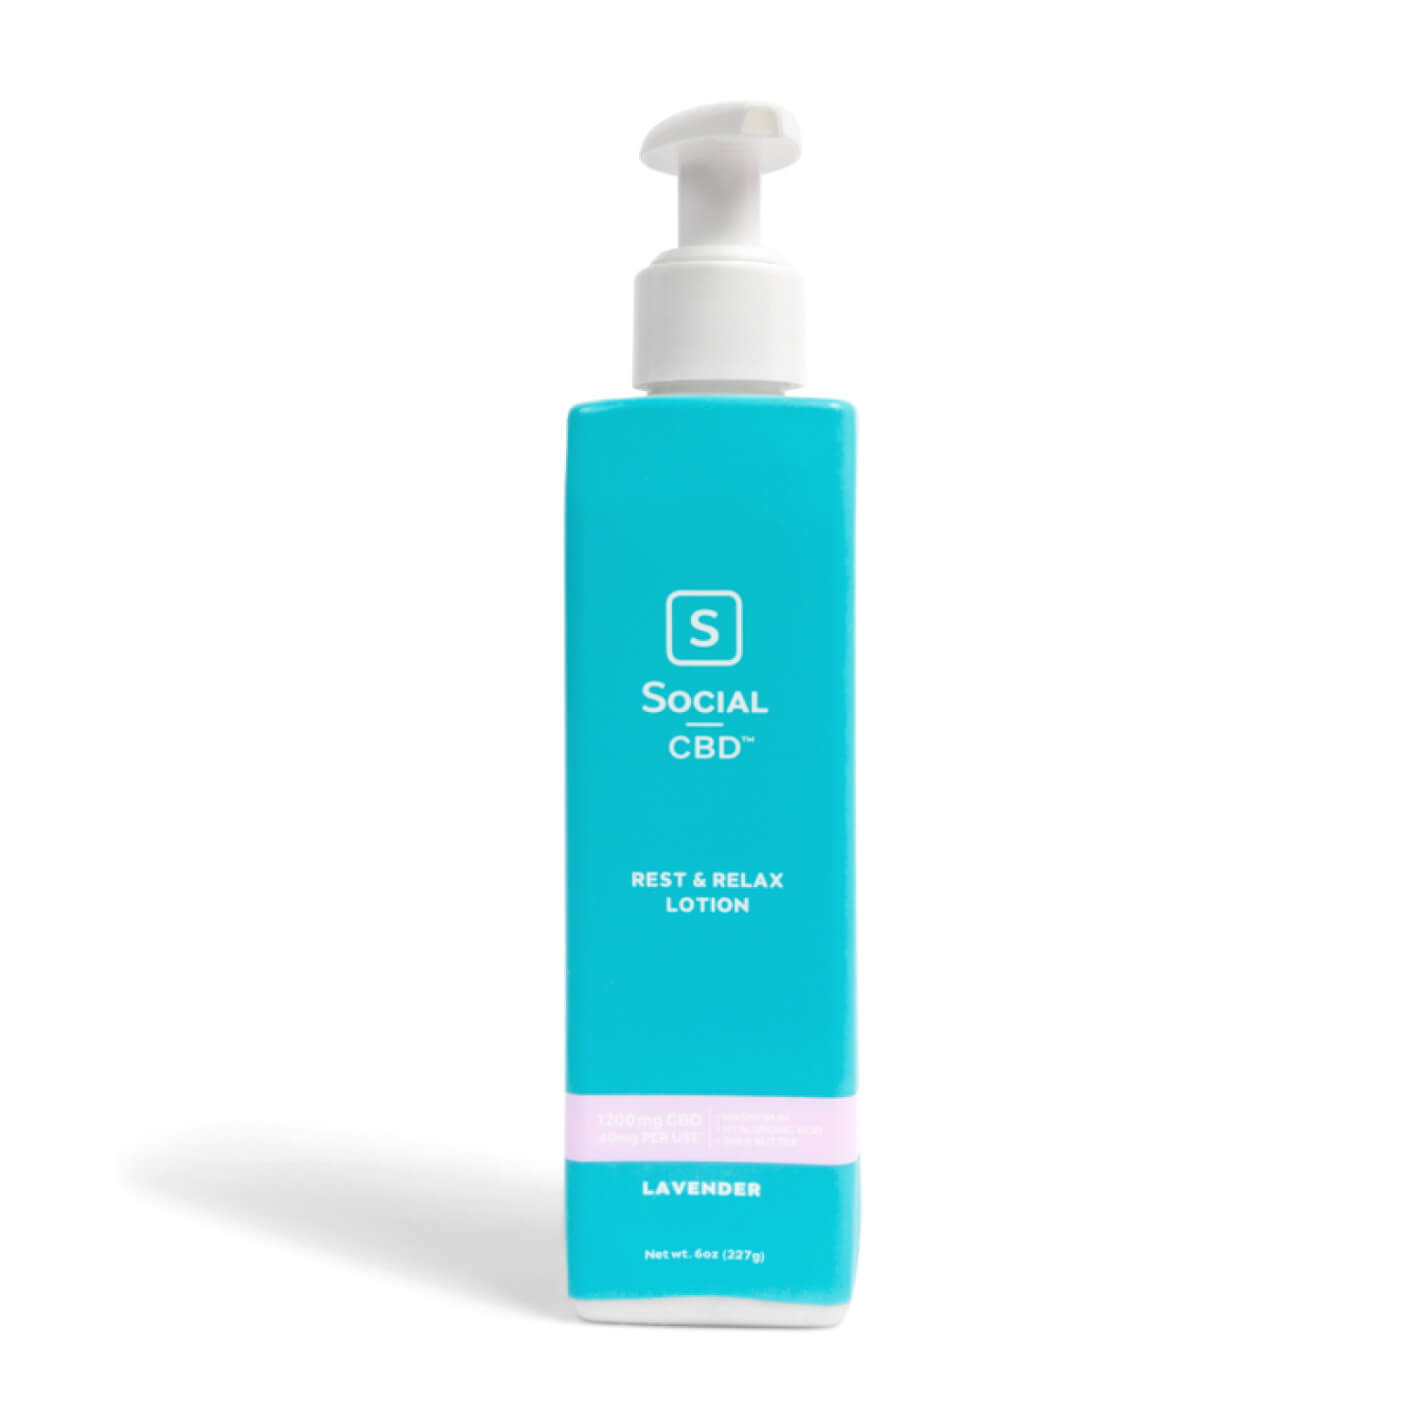 Rest and Relax CBD Body Lotion 1200mg logo